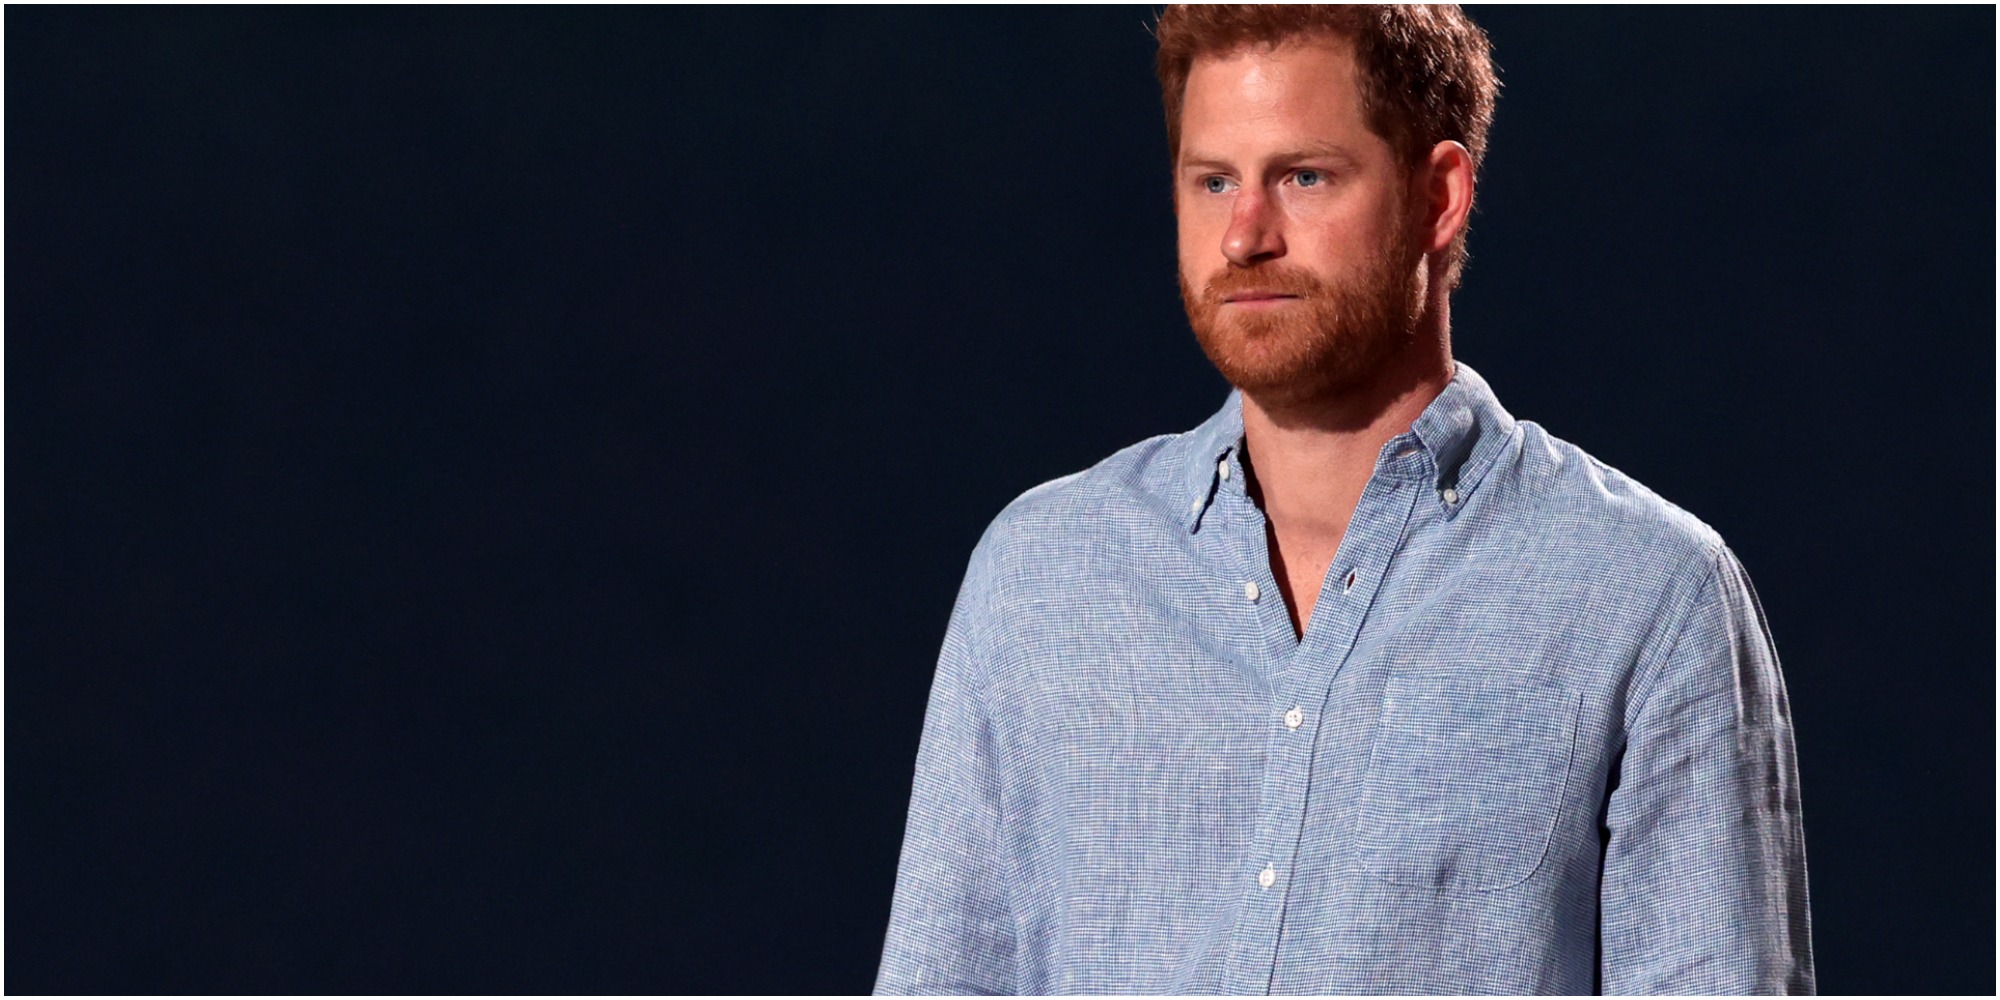 Prince Harry speaks onstage during Global Citizen VAX LIVE: The Concert To Reunite The World at SoFi Stadium in Inglewood, California.